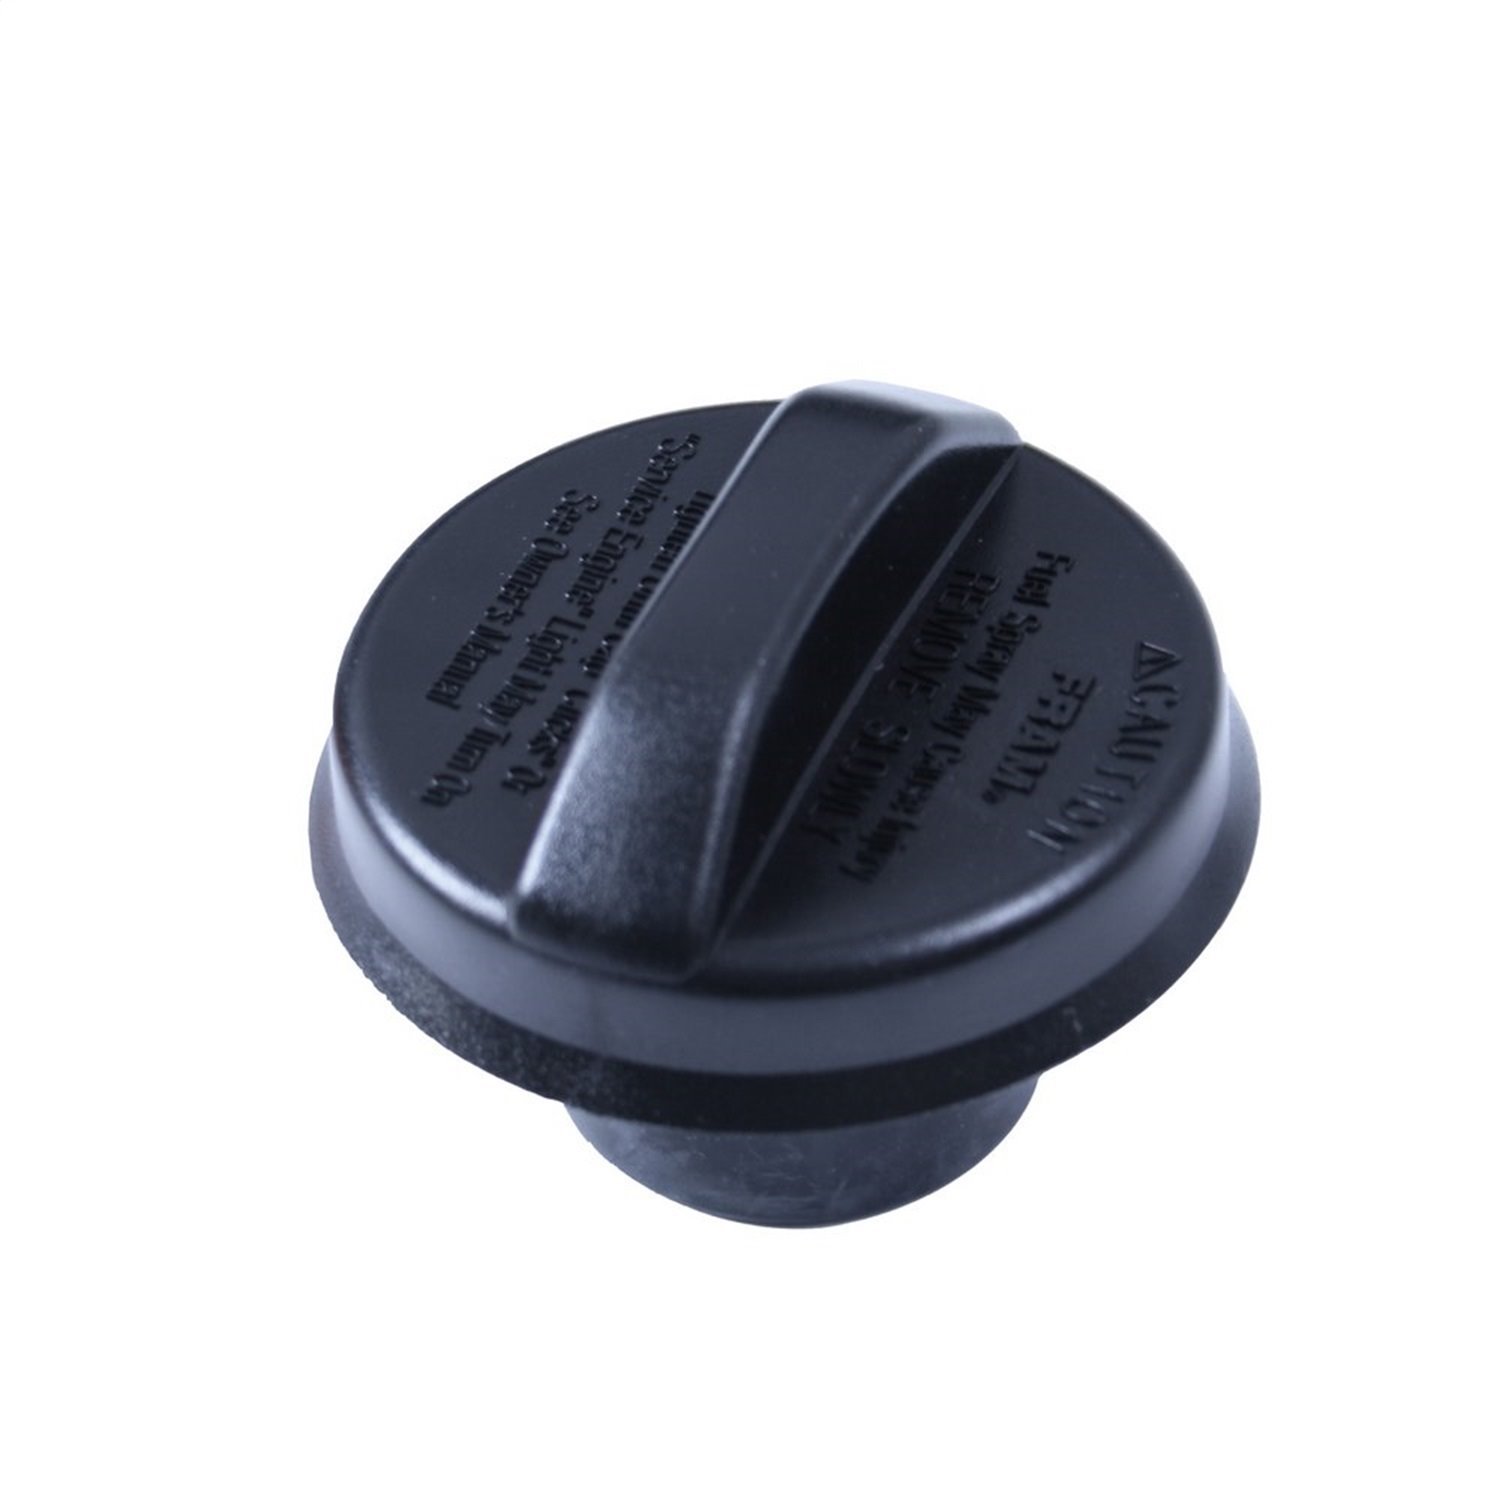 This black non-locking gas cap from Omix-ADA fits 01-06 Jeep Wrangler 00-01 XJ Cherokees 01-04 WJ Gr